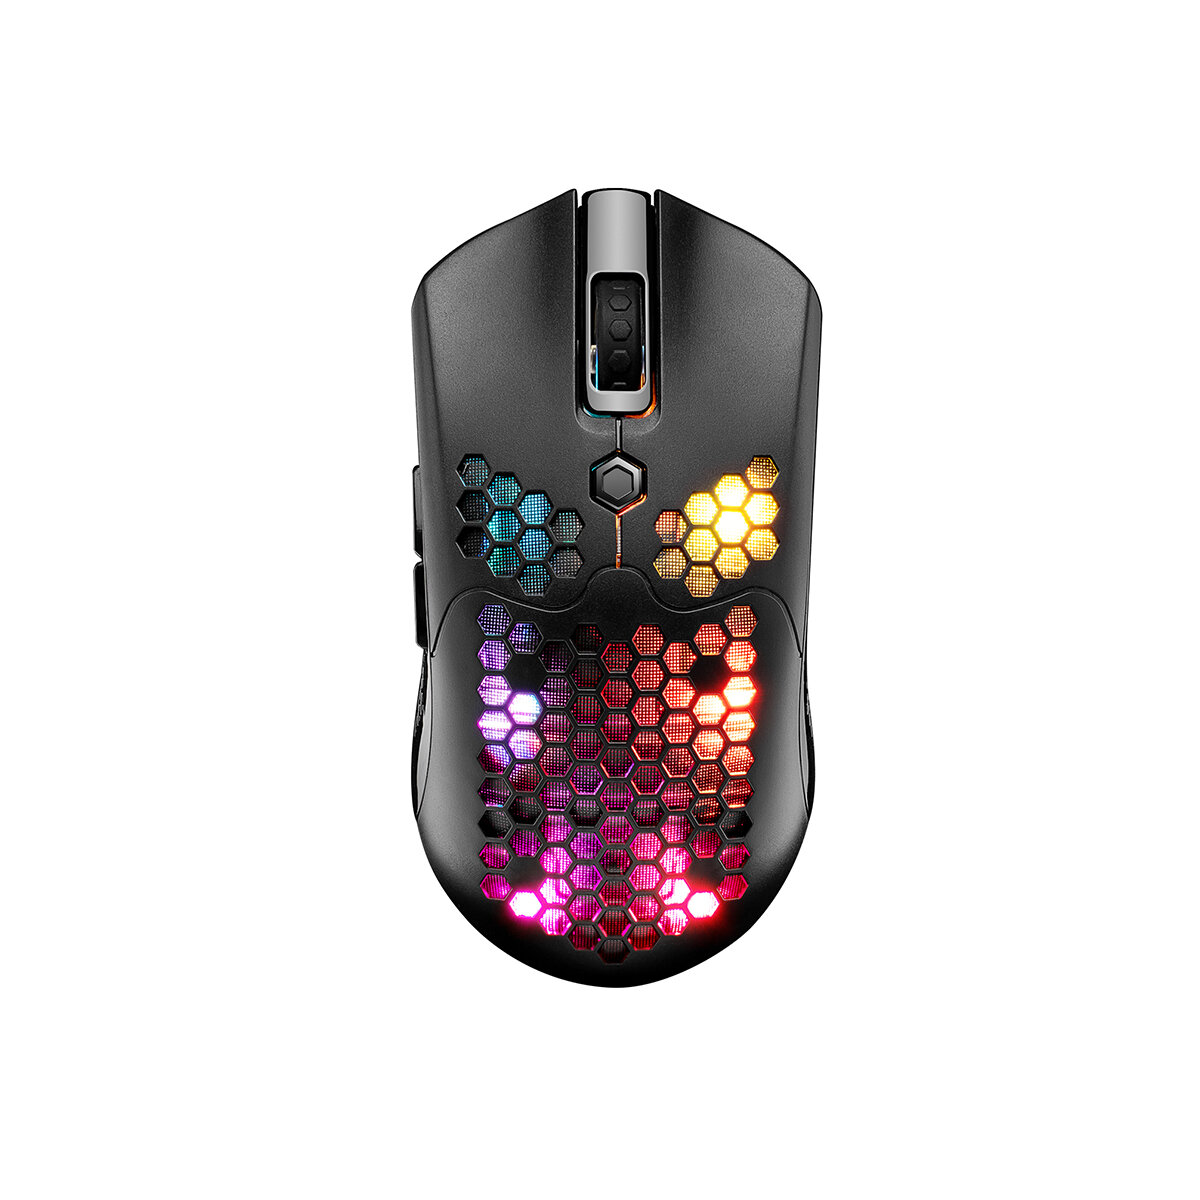 ZIYOULANG X2 2.4G Wireless Gaming Mouse Hollow Honeycomb Rechargeable 12000DPI 7 Buttons RGB Optical